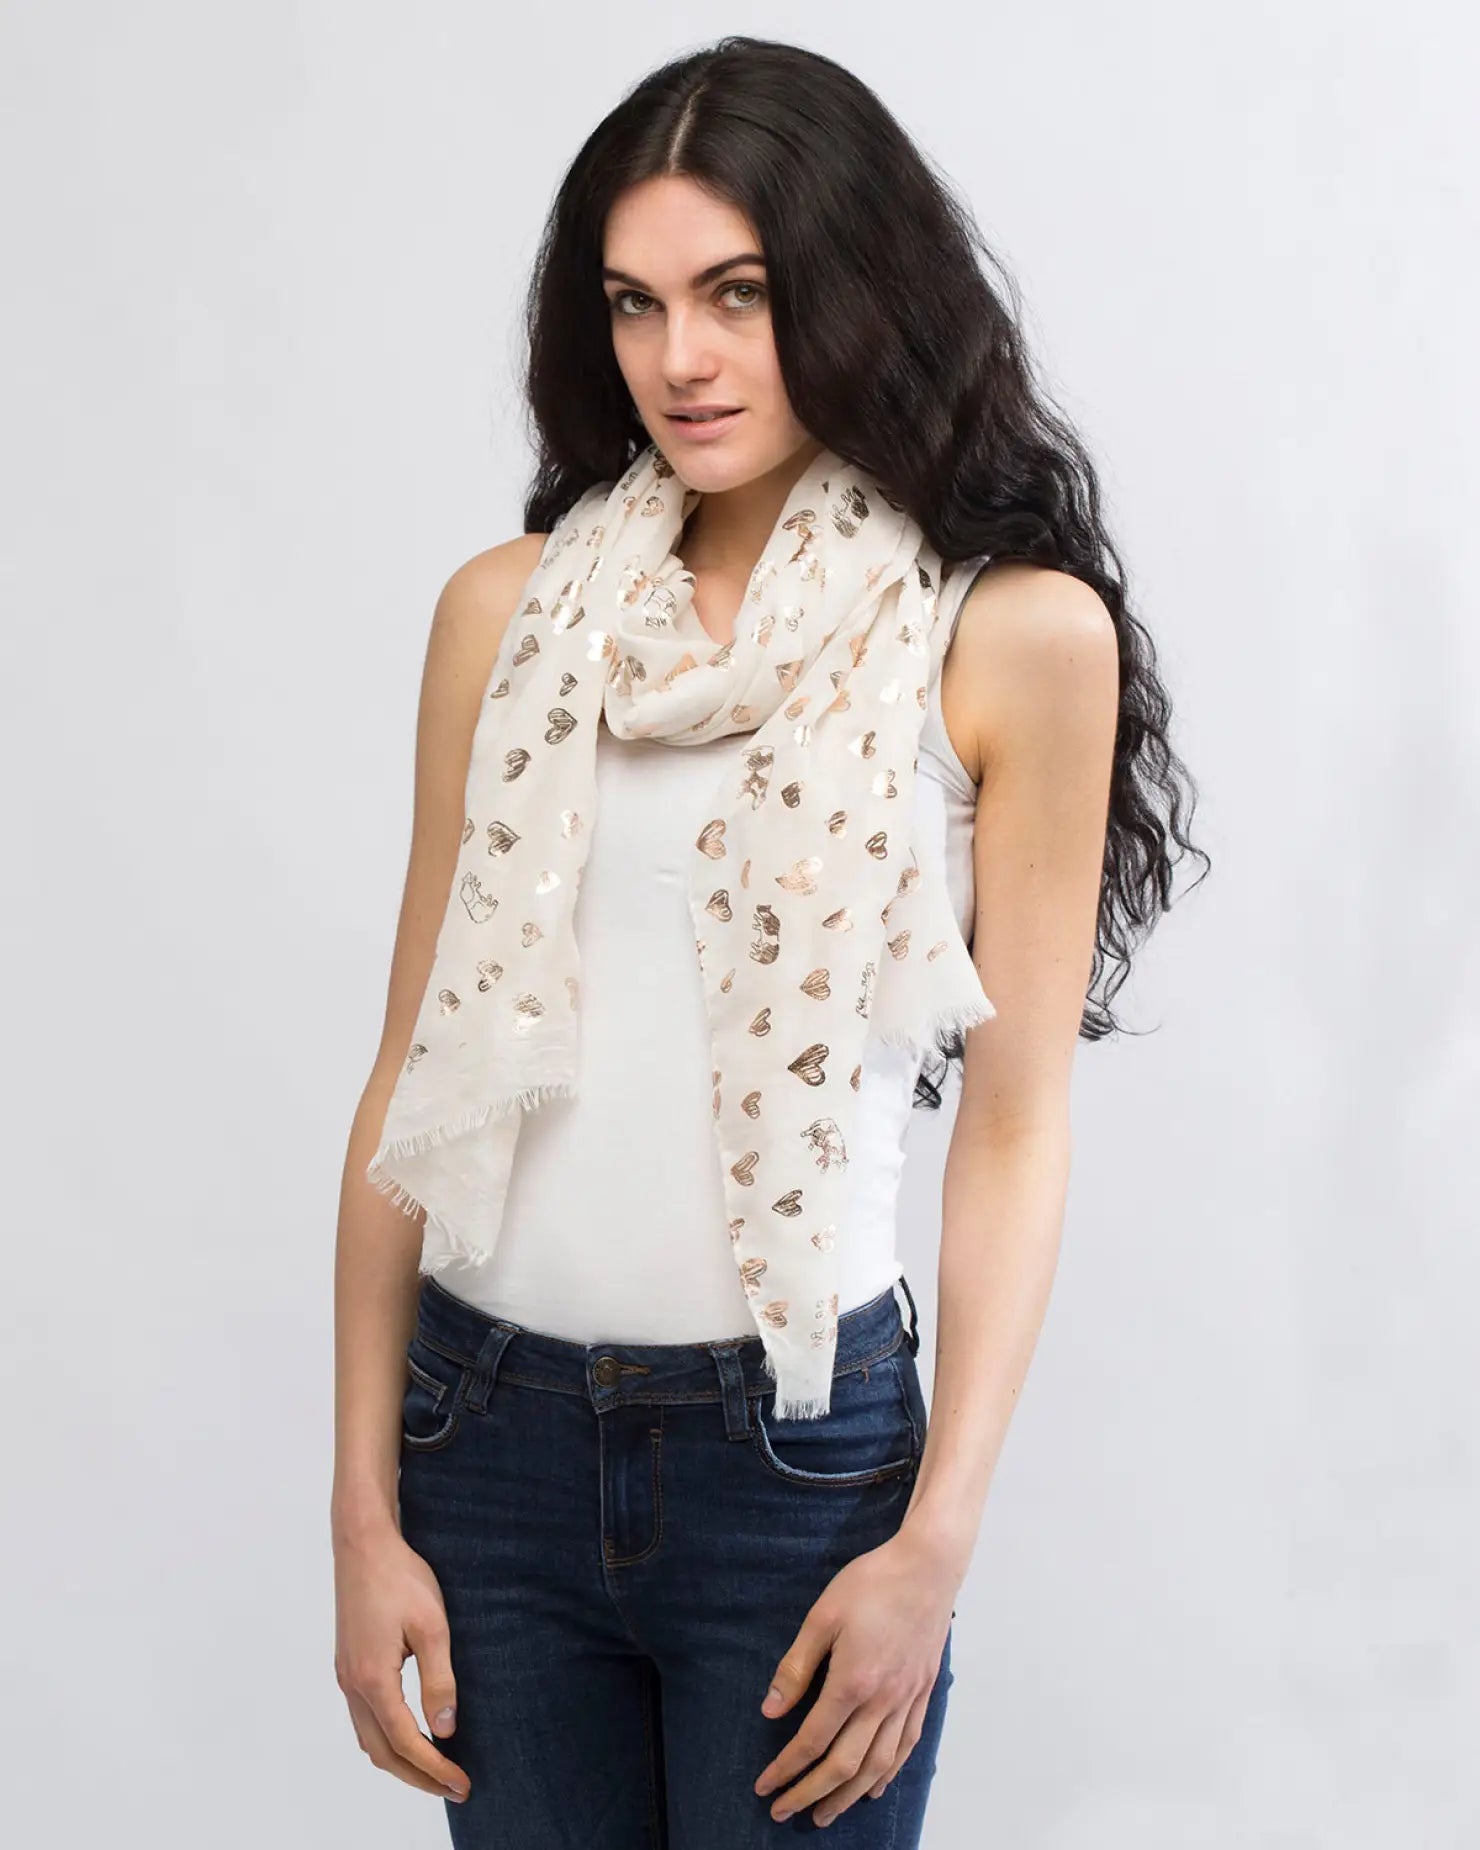 Woman wearing white floral pattern scarf from Heart & Cow Print Silver Foil Oversized Scarf